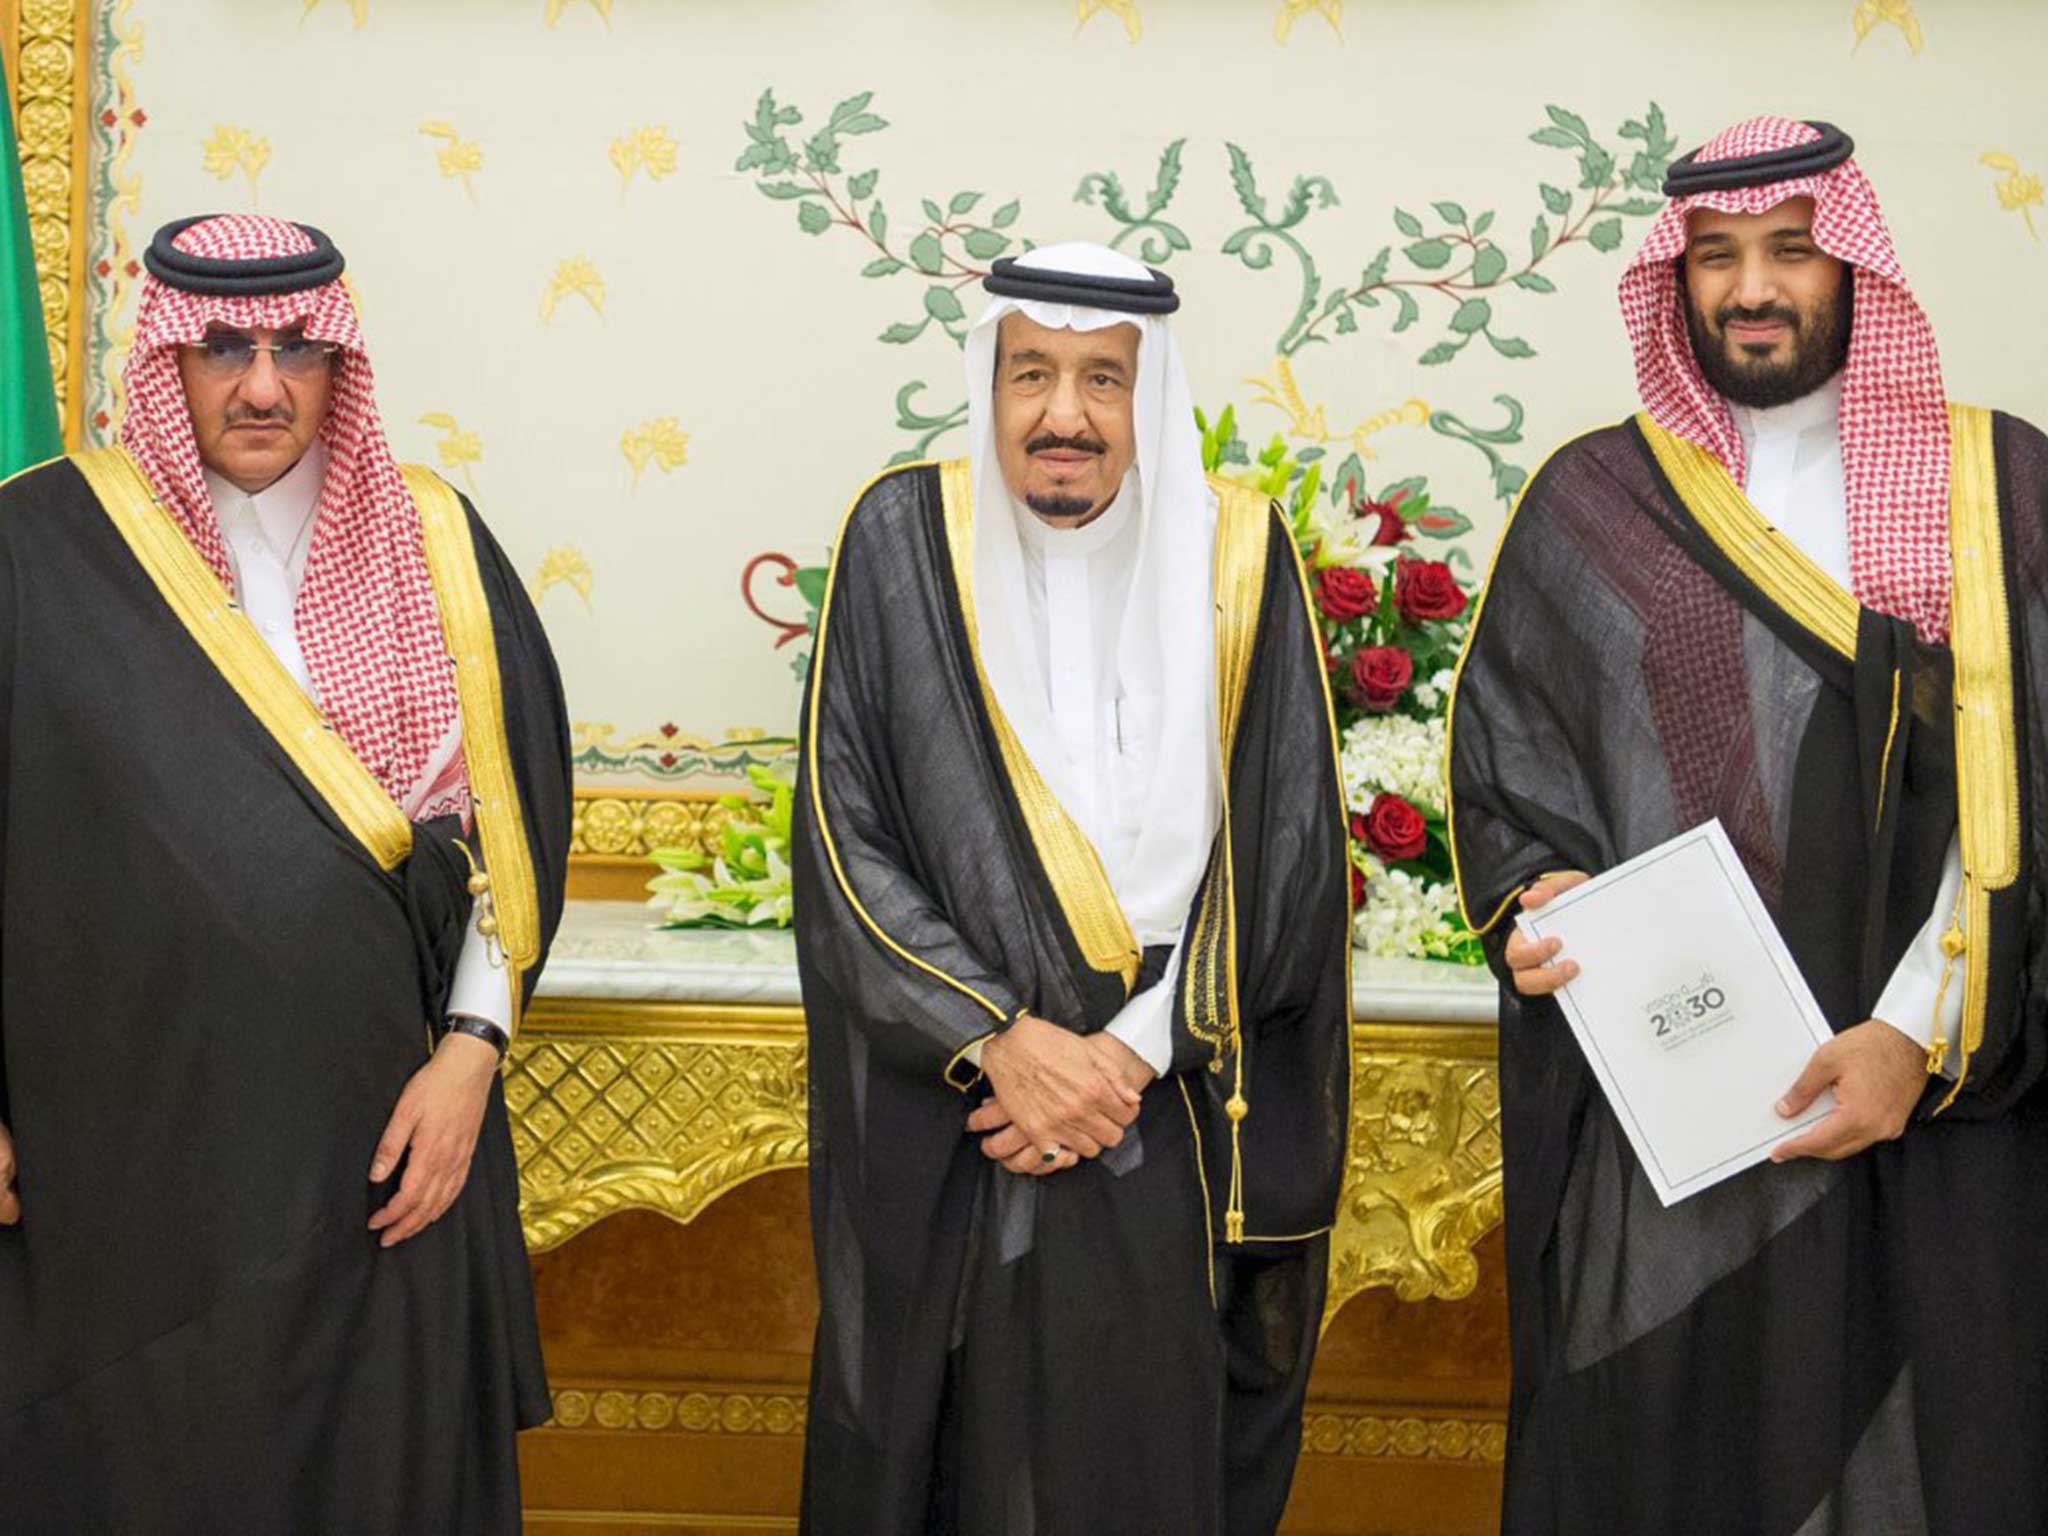 The Saudi ruling family. The country has recently suffered a number of setbacks on the international stage